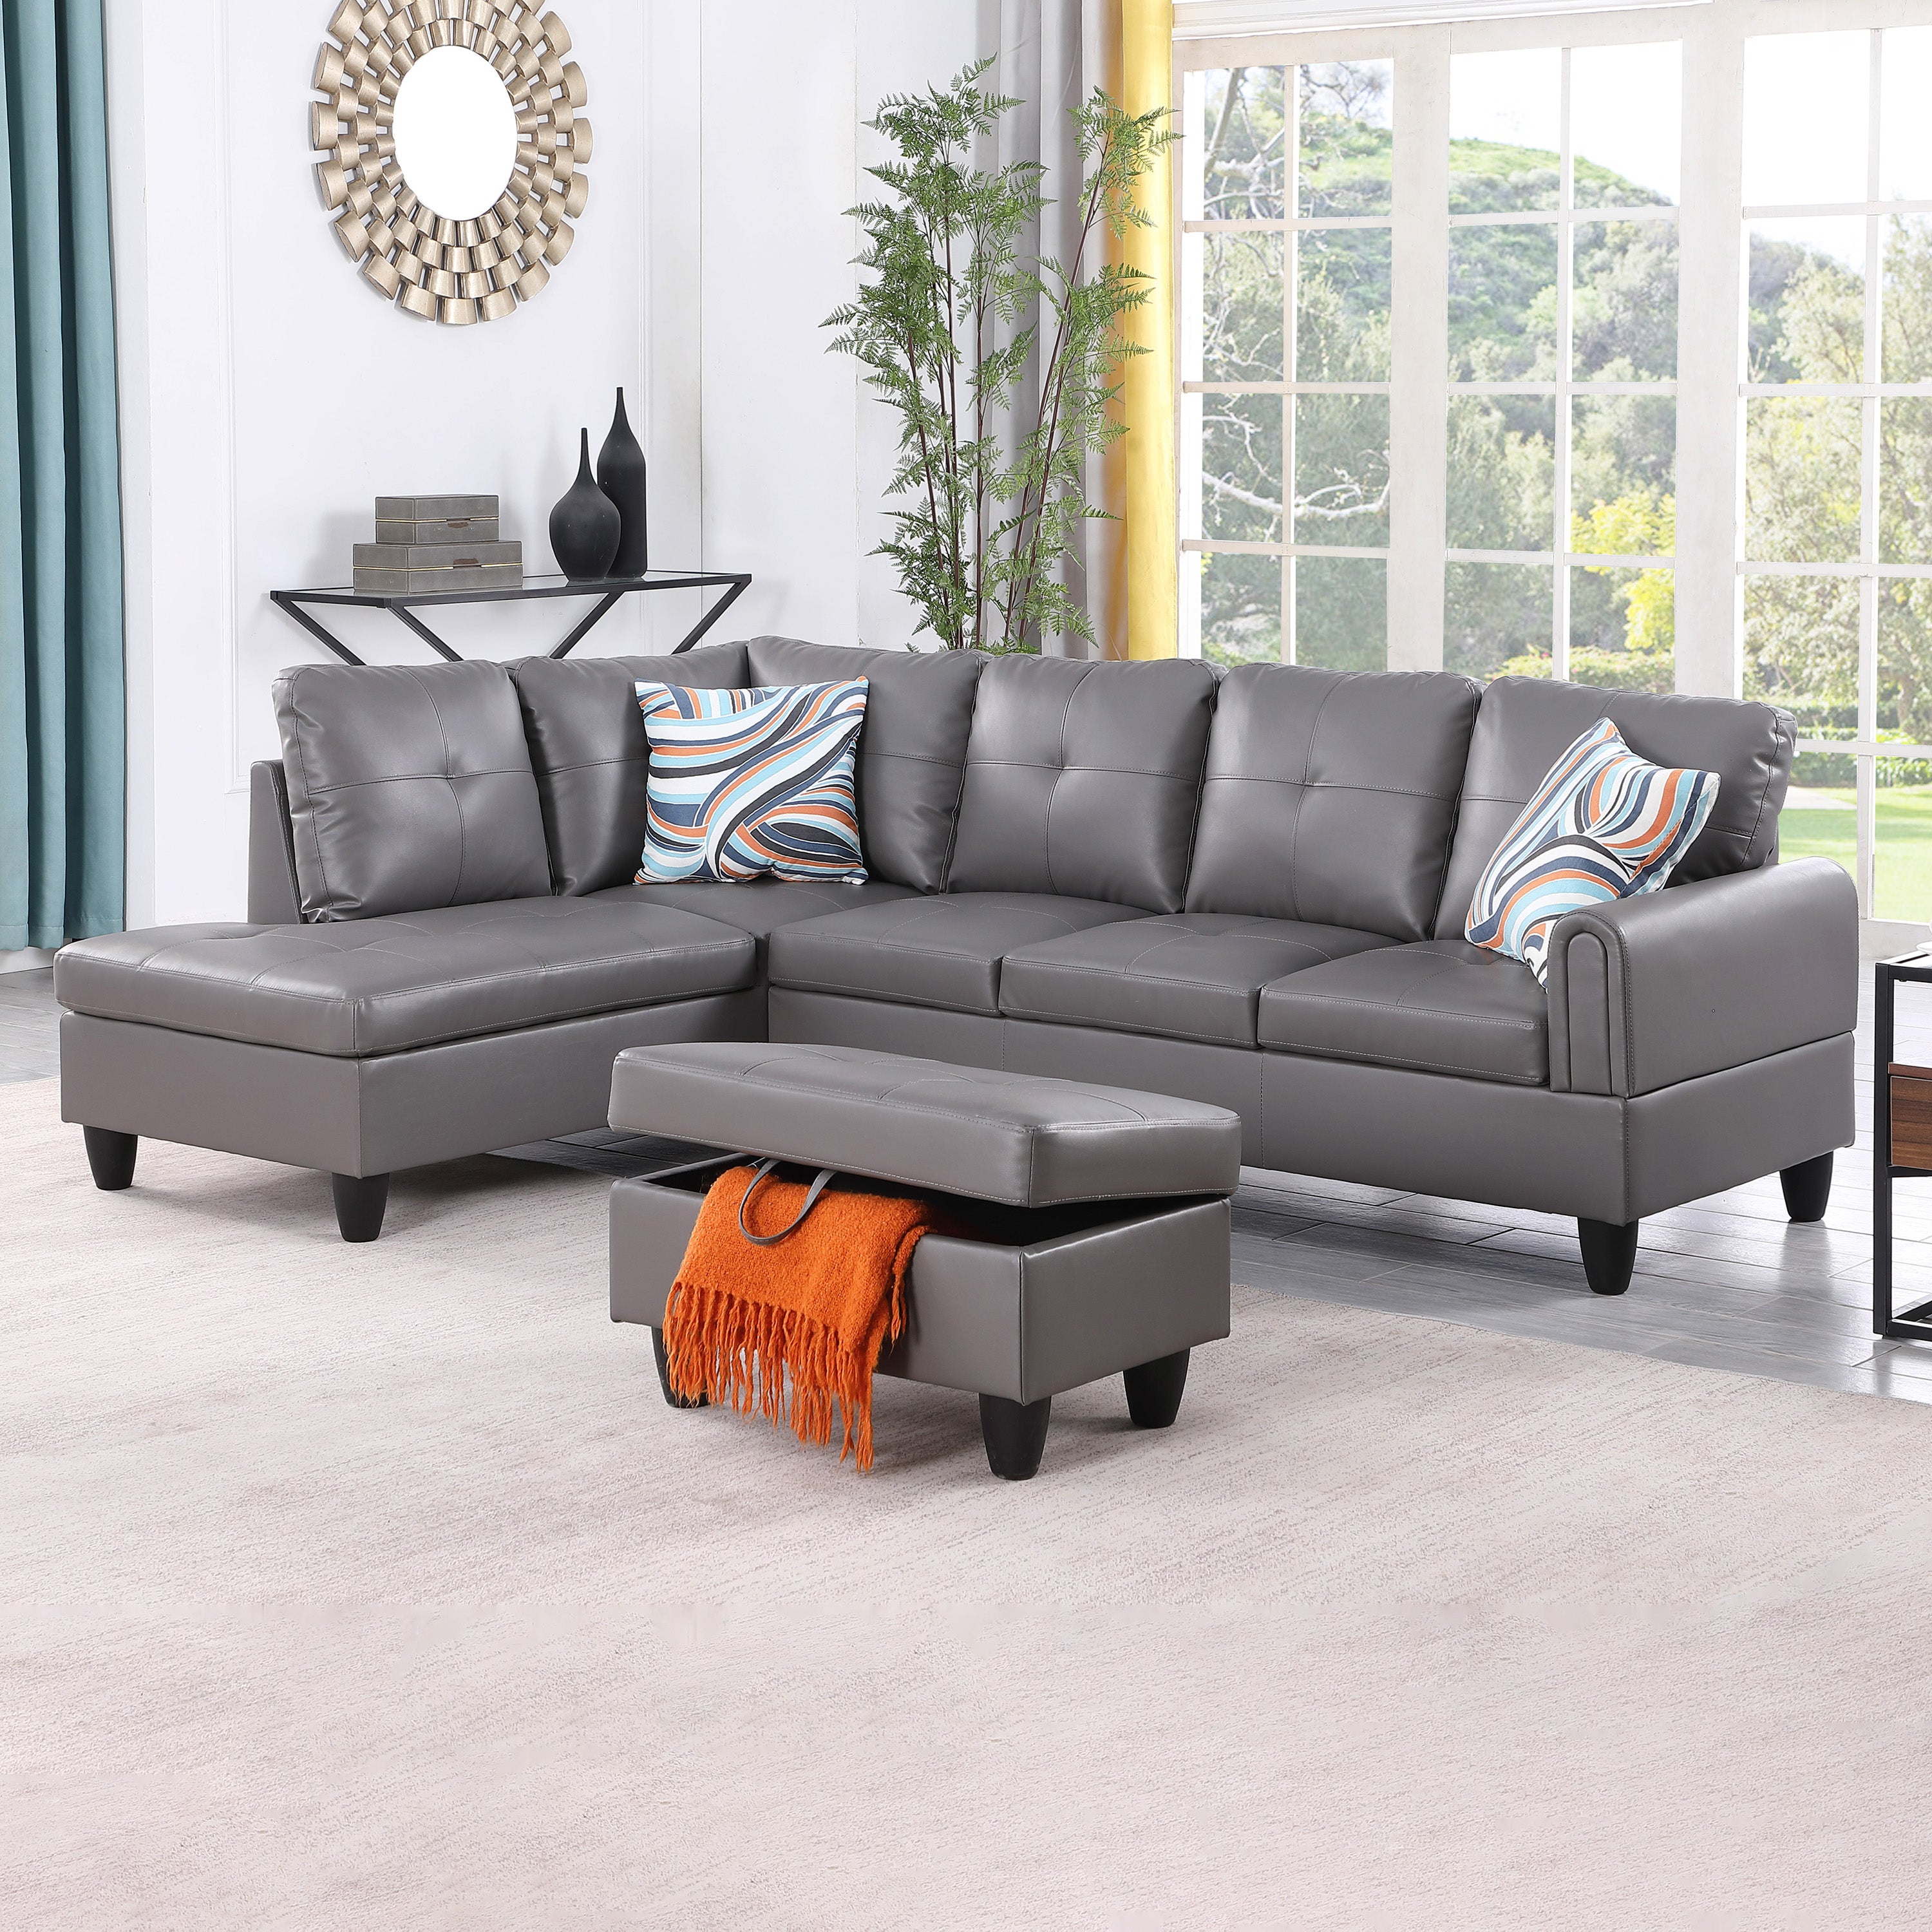 Ainehome Dark Grey Faux Leather Living Room Sofa Set